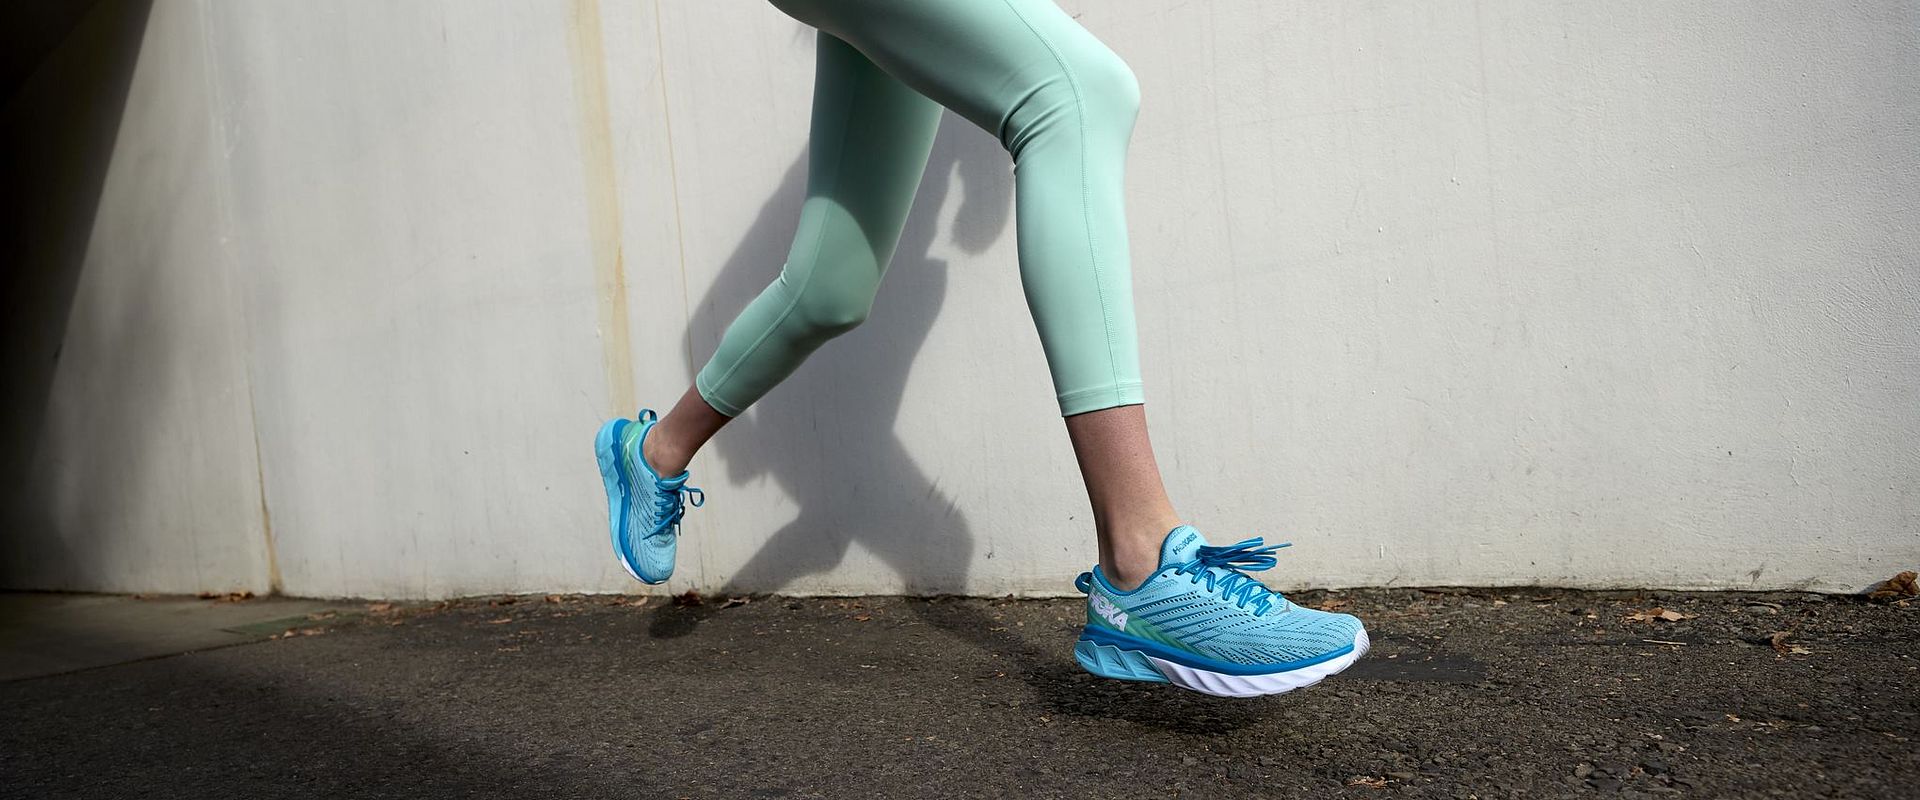 Guide to which hoka shoe is best for me - Shoe Tips